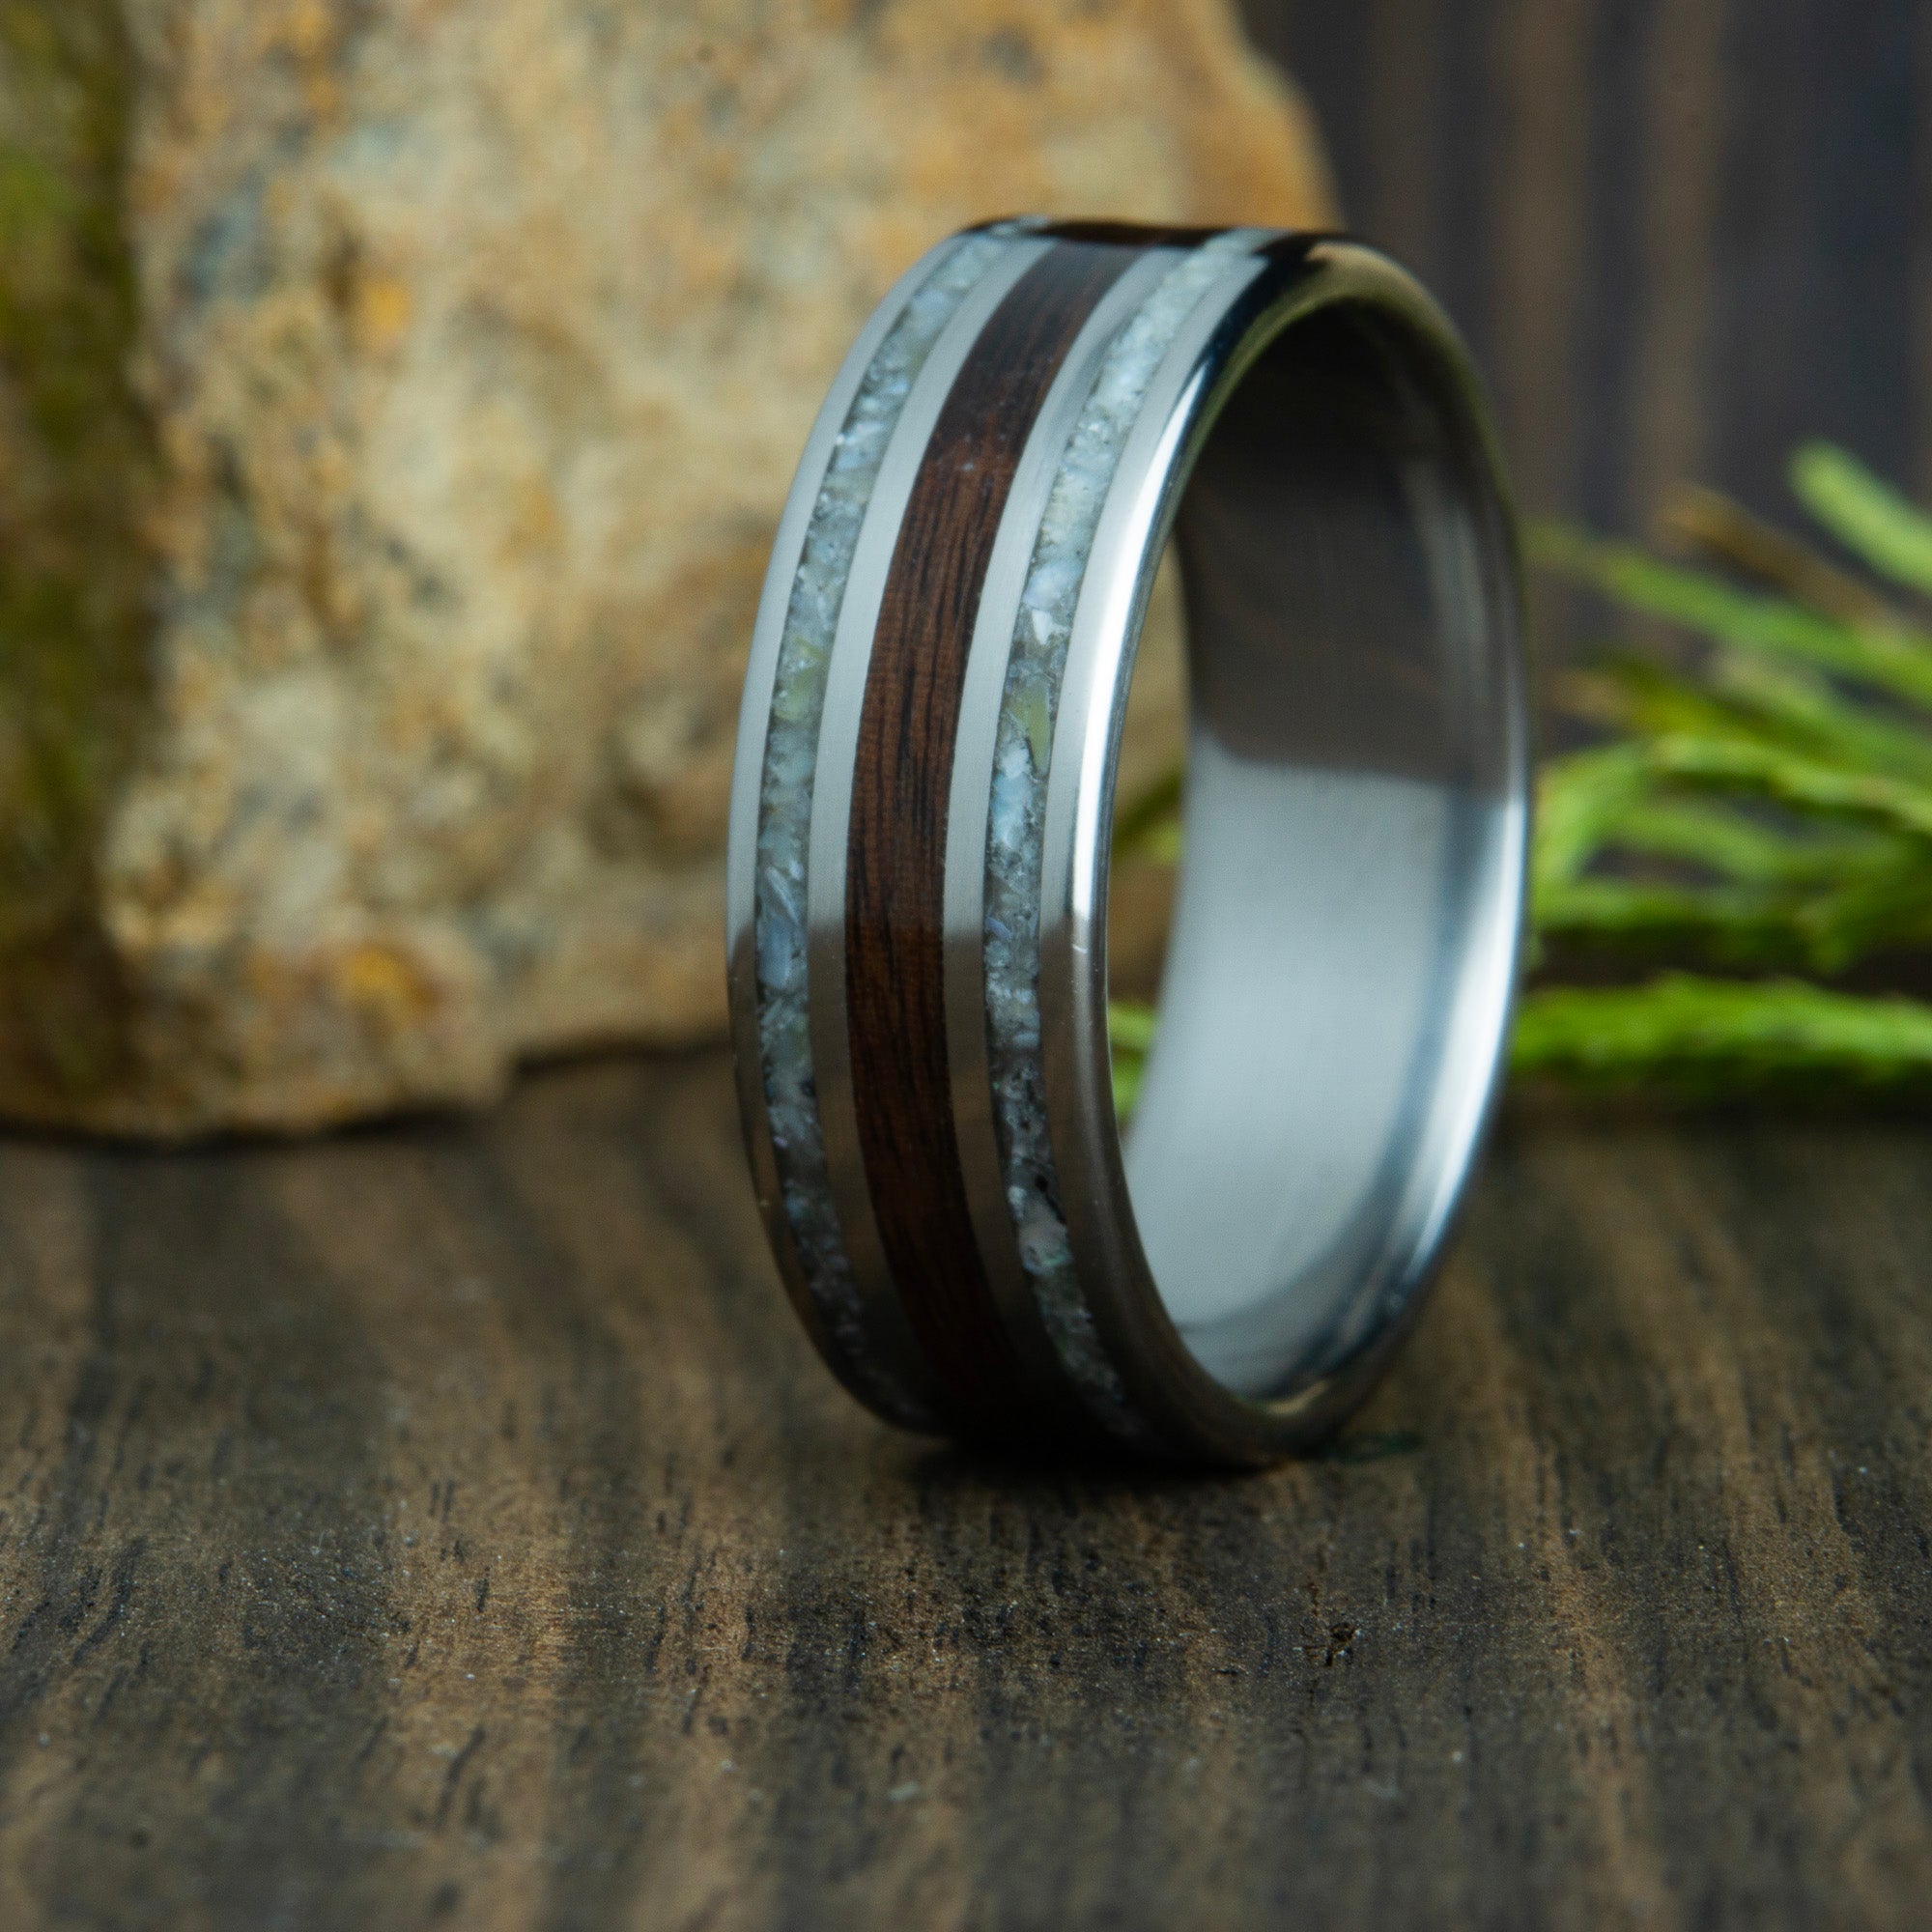 Rosewood and mother of pearl mens wood wedding band